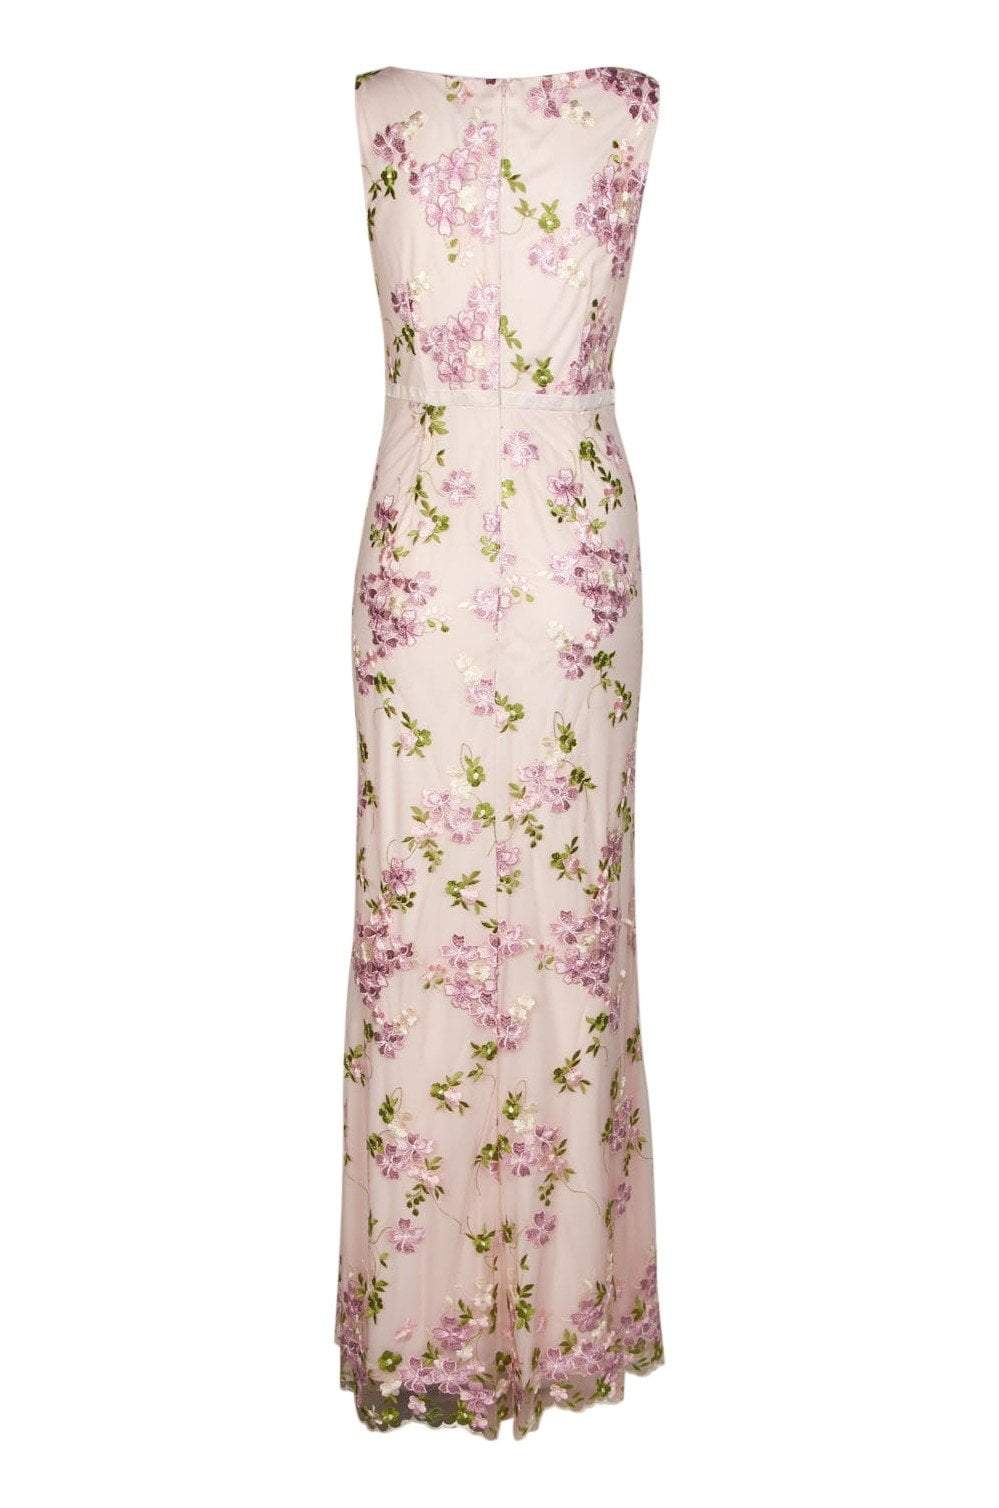 Adrianna Papell - AP1E204015 Floral Embroidered Bateau Sheath Dress In Pink and Multi-Color